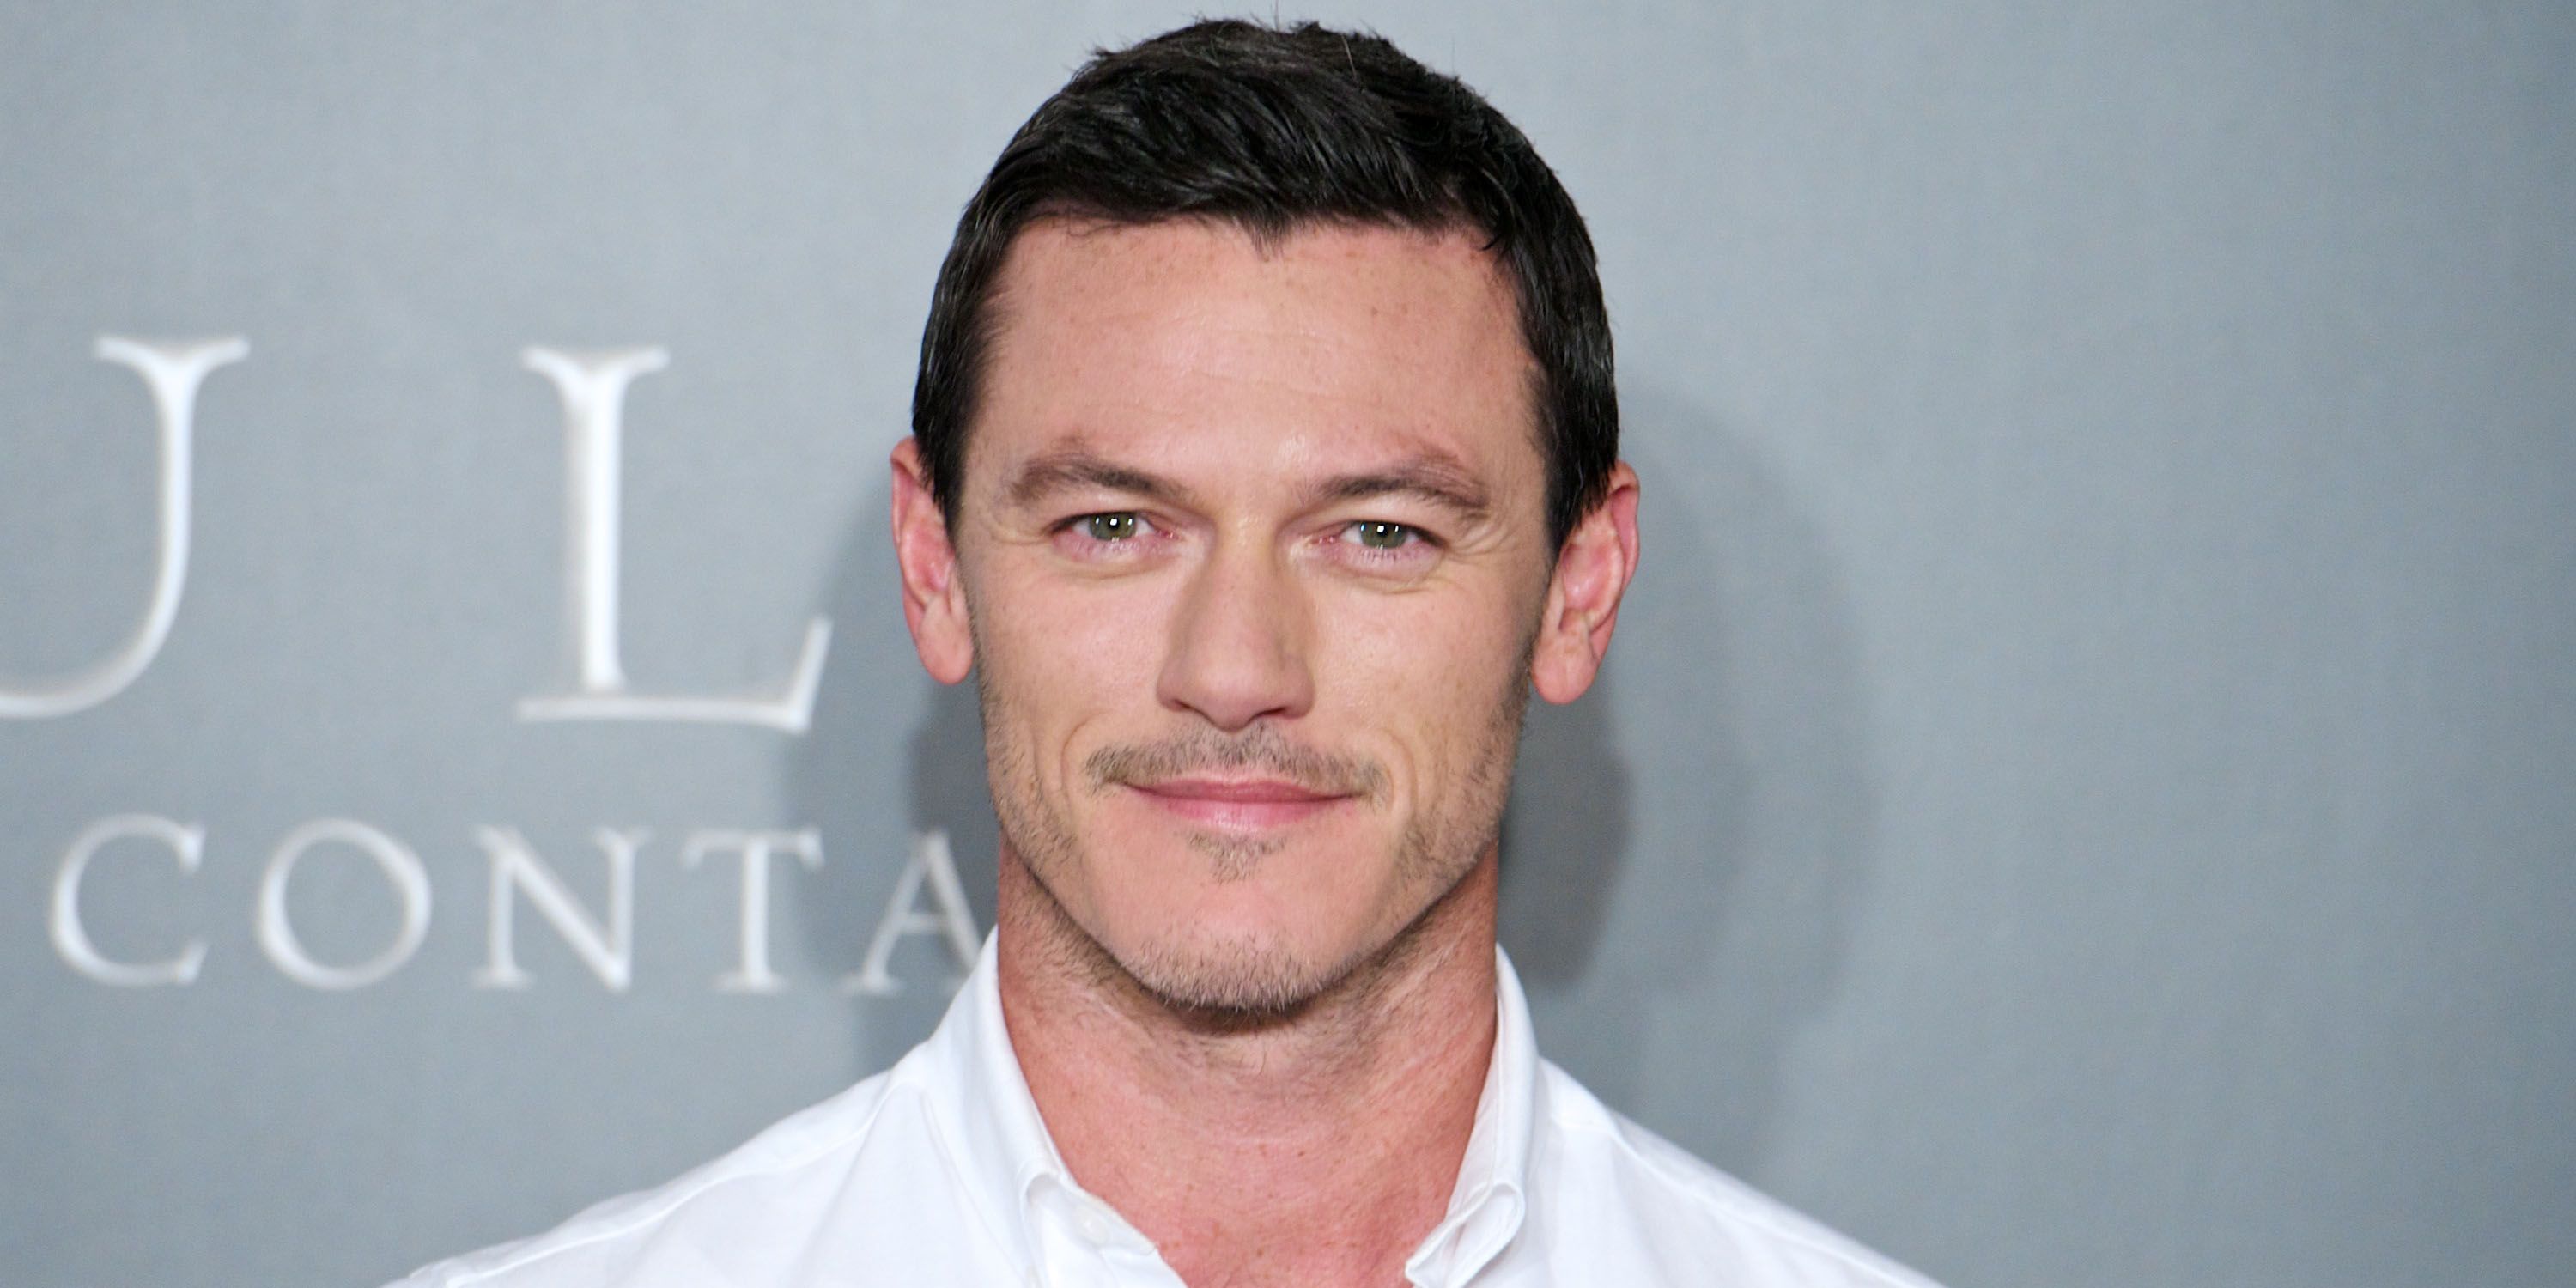 Luke Evans Sang Beauty And The Beast Songs During Sex